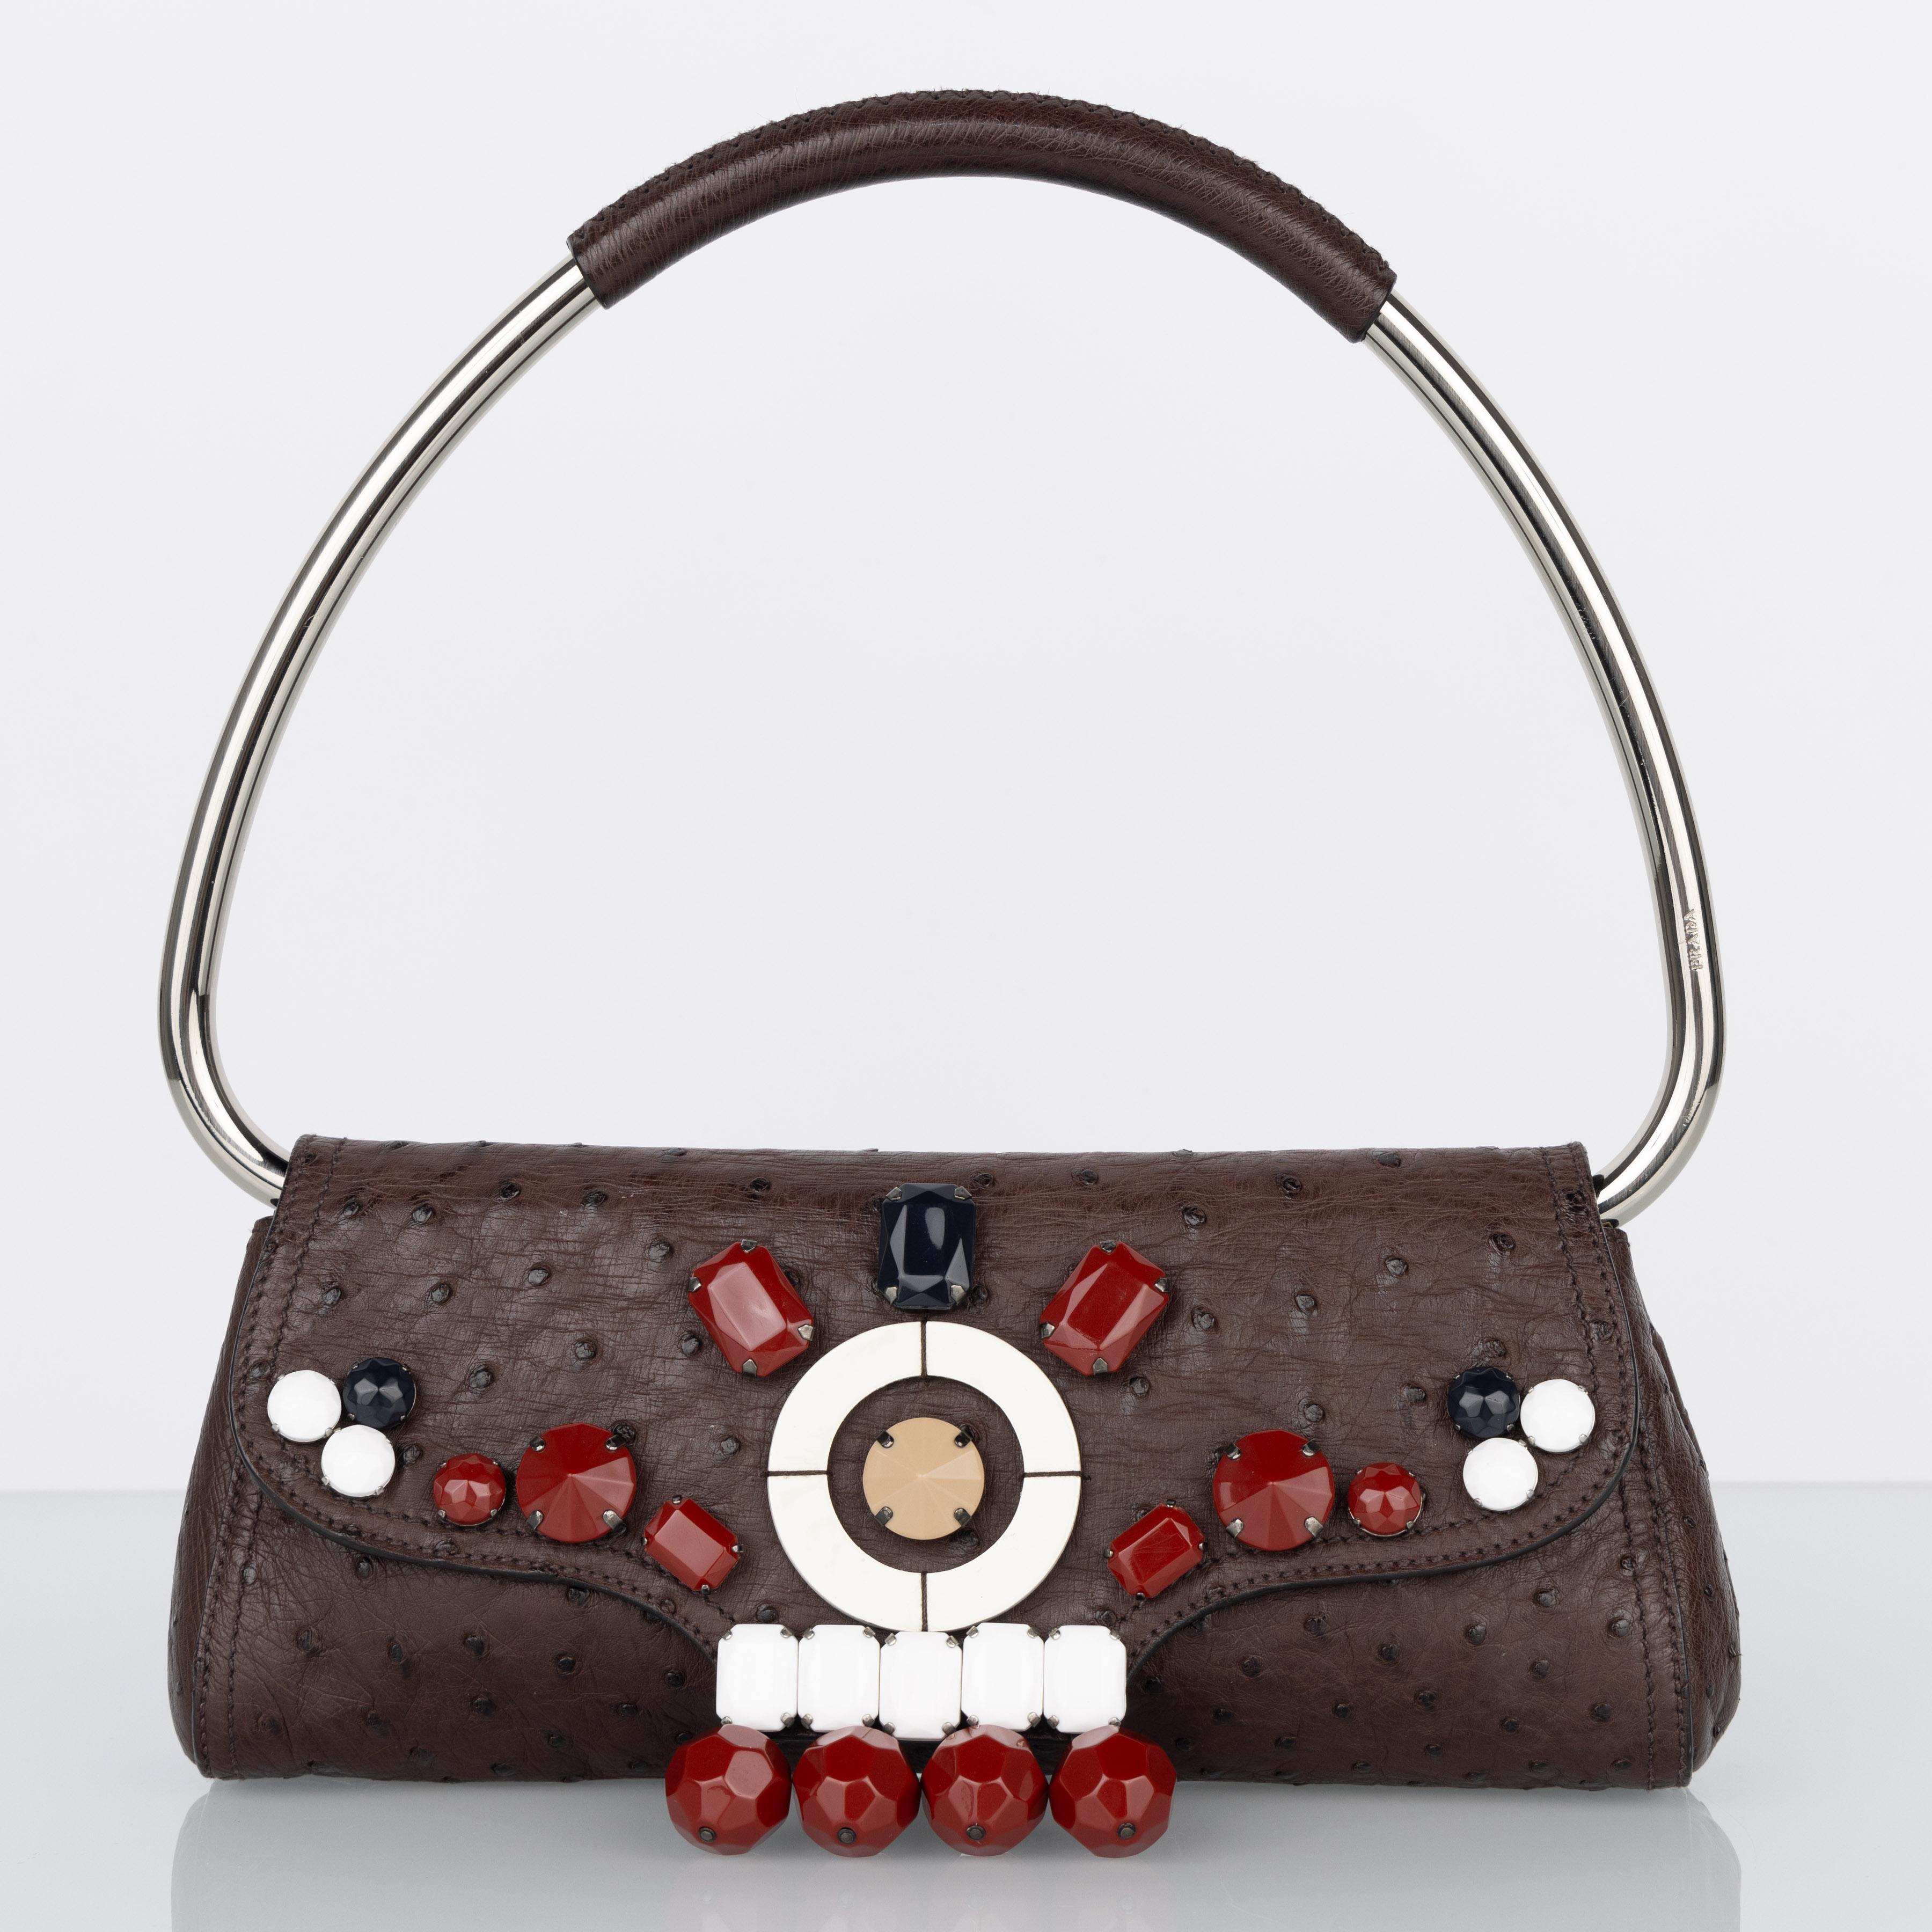 Prada Brown Ostrich Leather Jewel Embellished Swing Bag SS 2003 Archival Piece In Excellent Condition For Sale In Boca Raton, FL